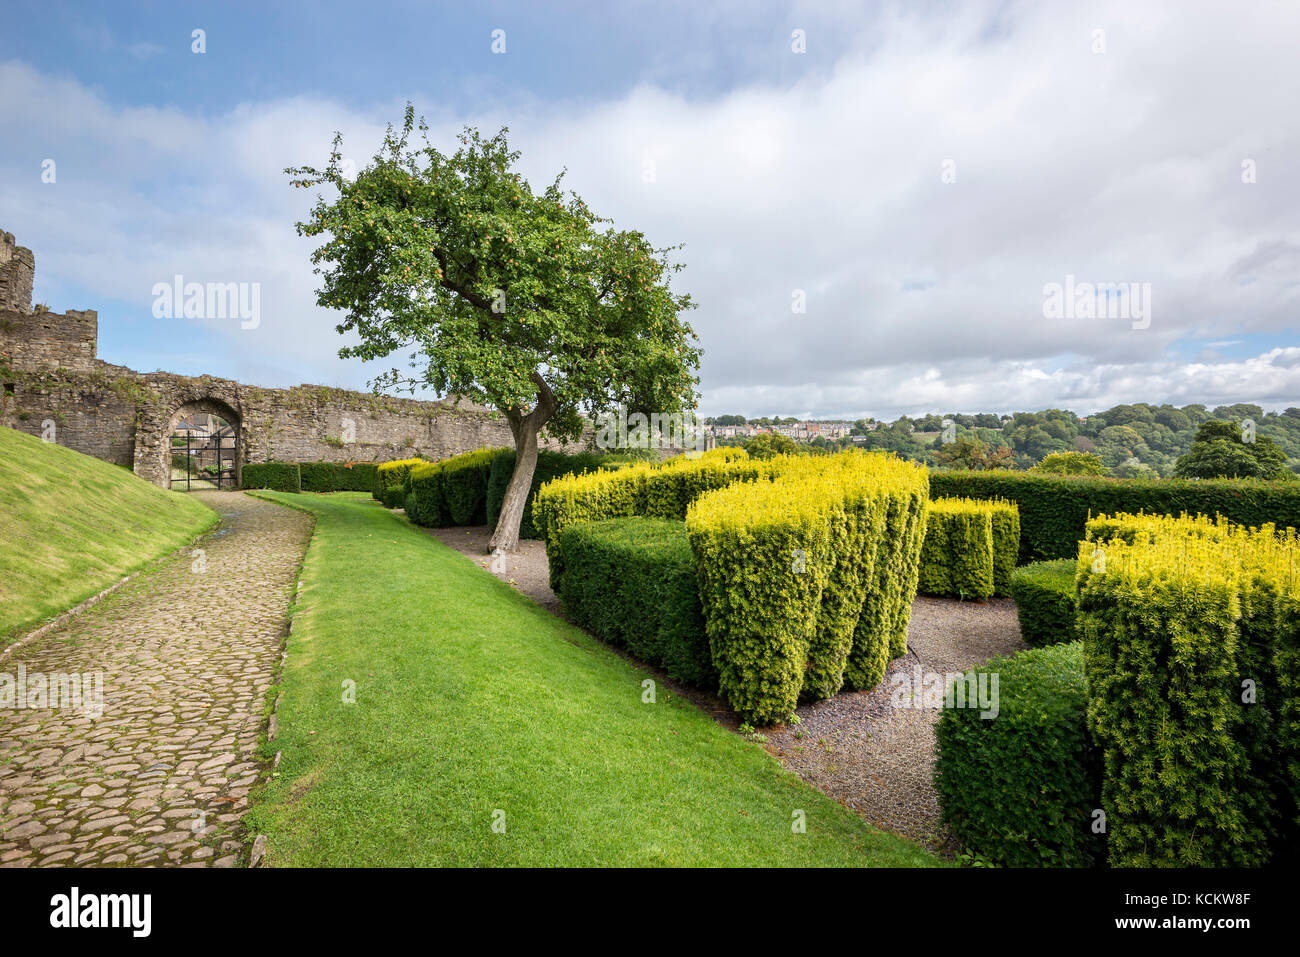 The Cockpit garden at Richmond Castle in North Yorkshire, England. Stock Photo